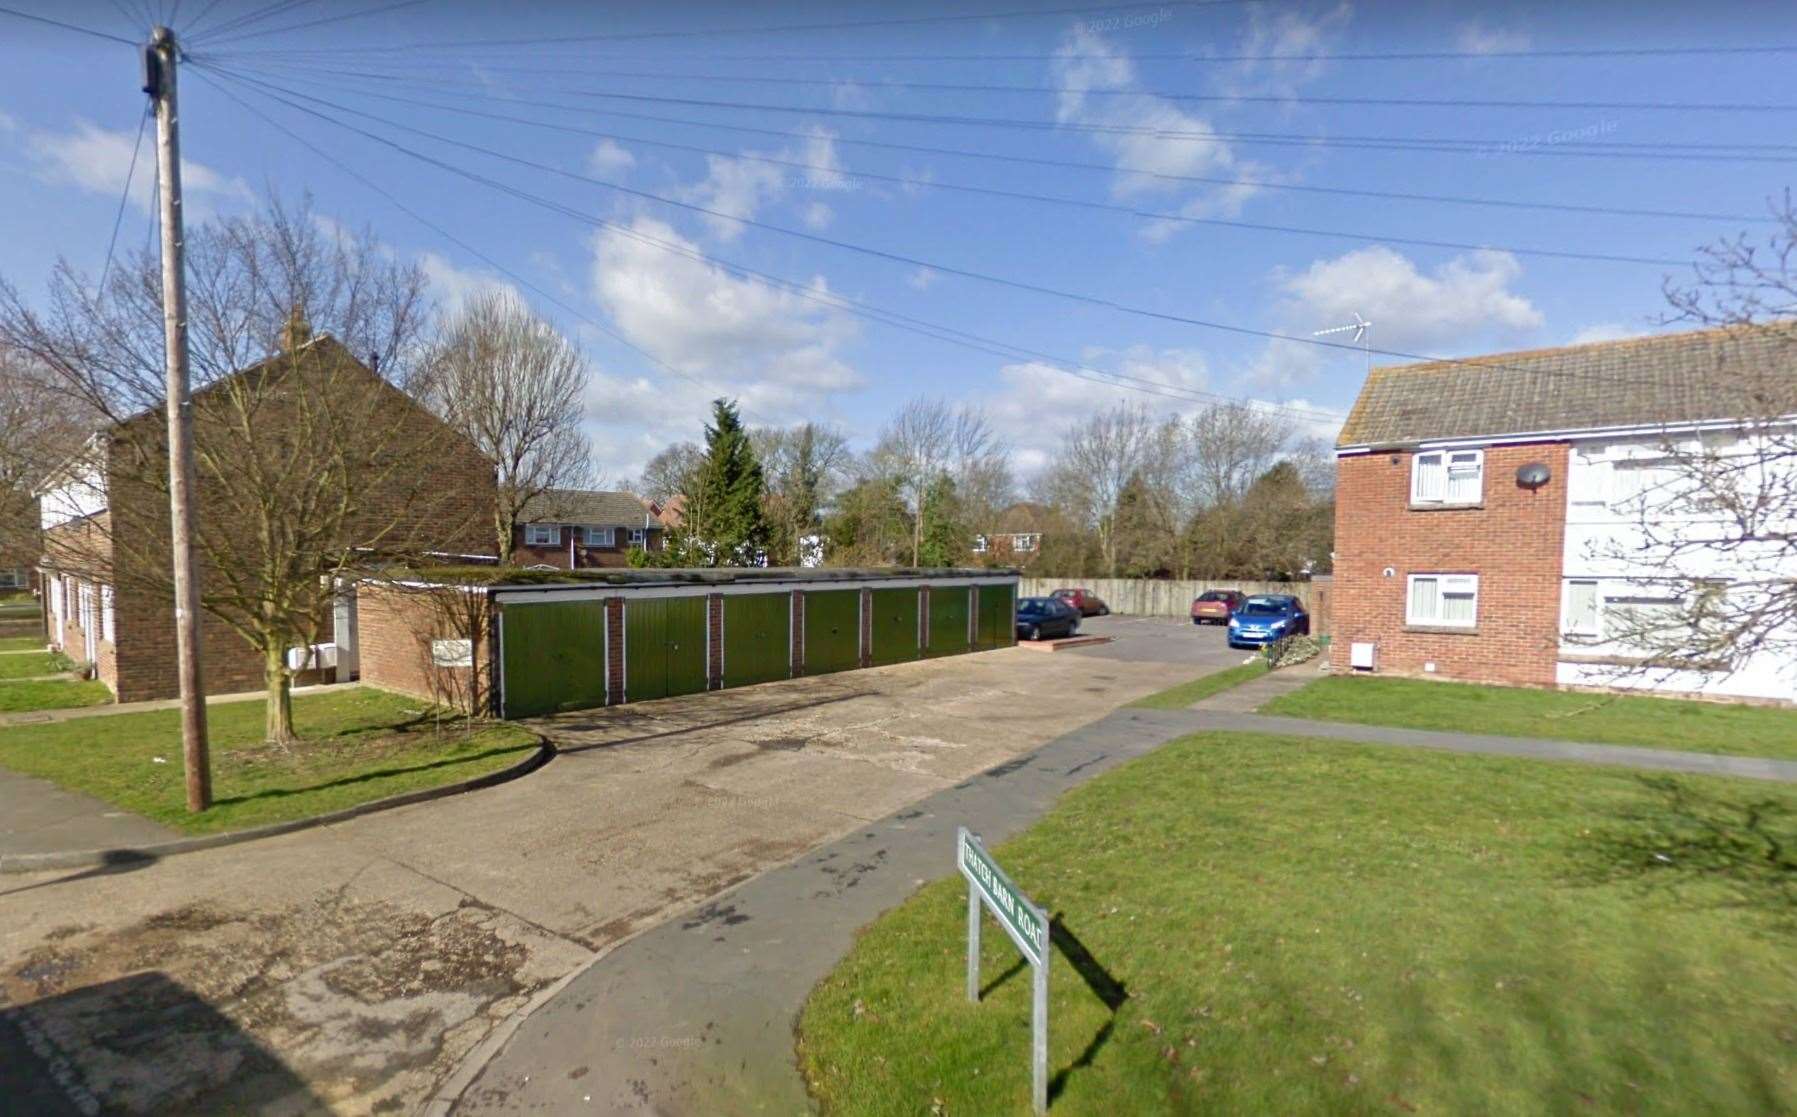 Garages in Thatch Barn Road, Headcorn, will also be knocked down. Picture: Google